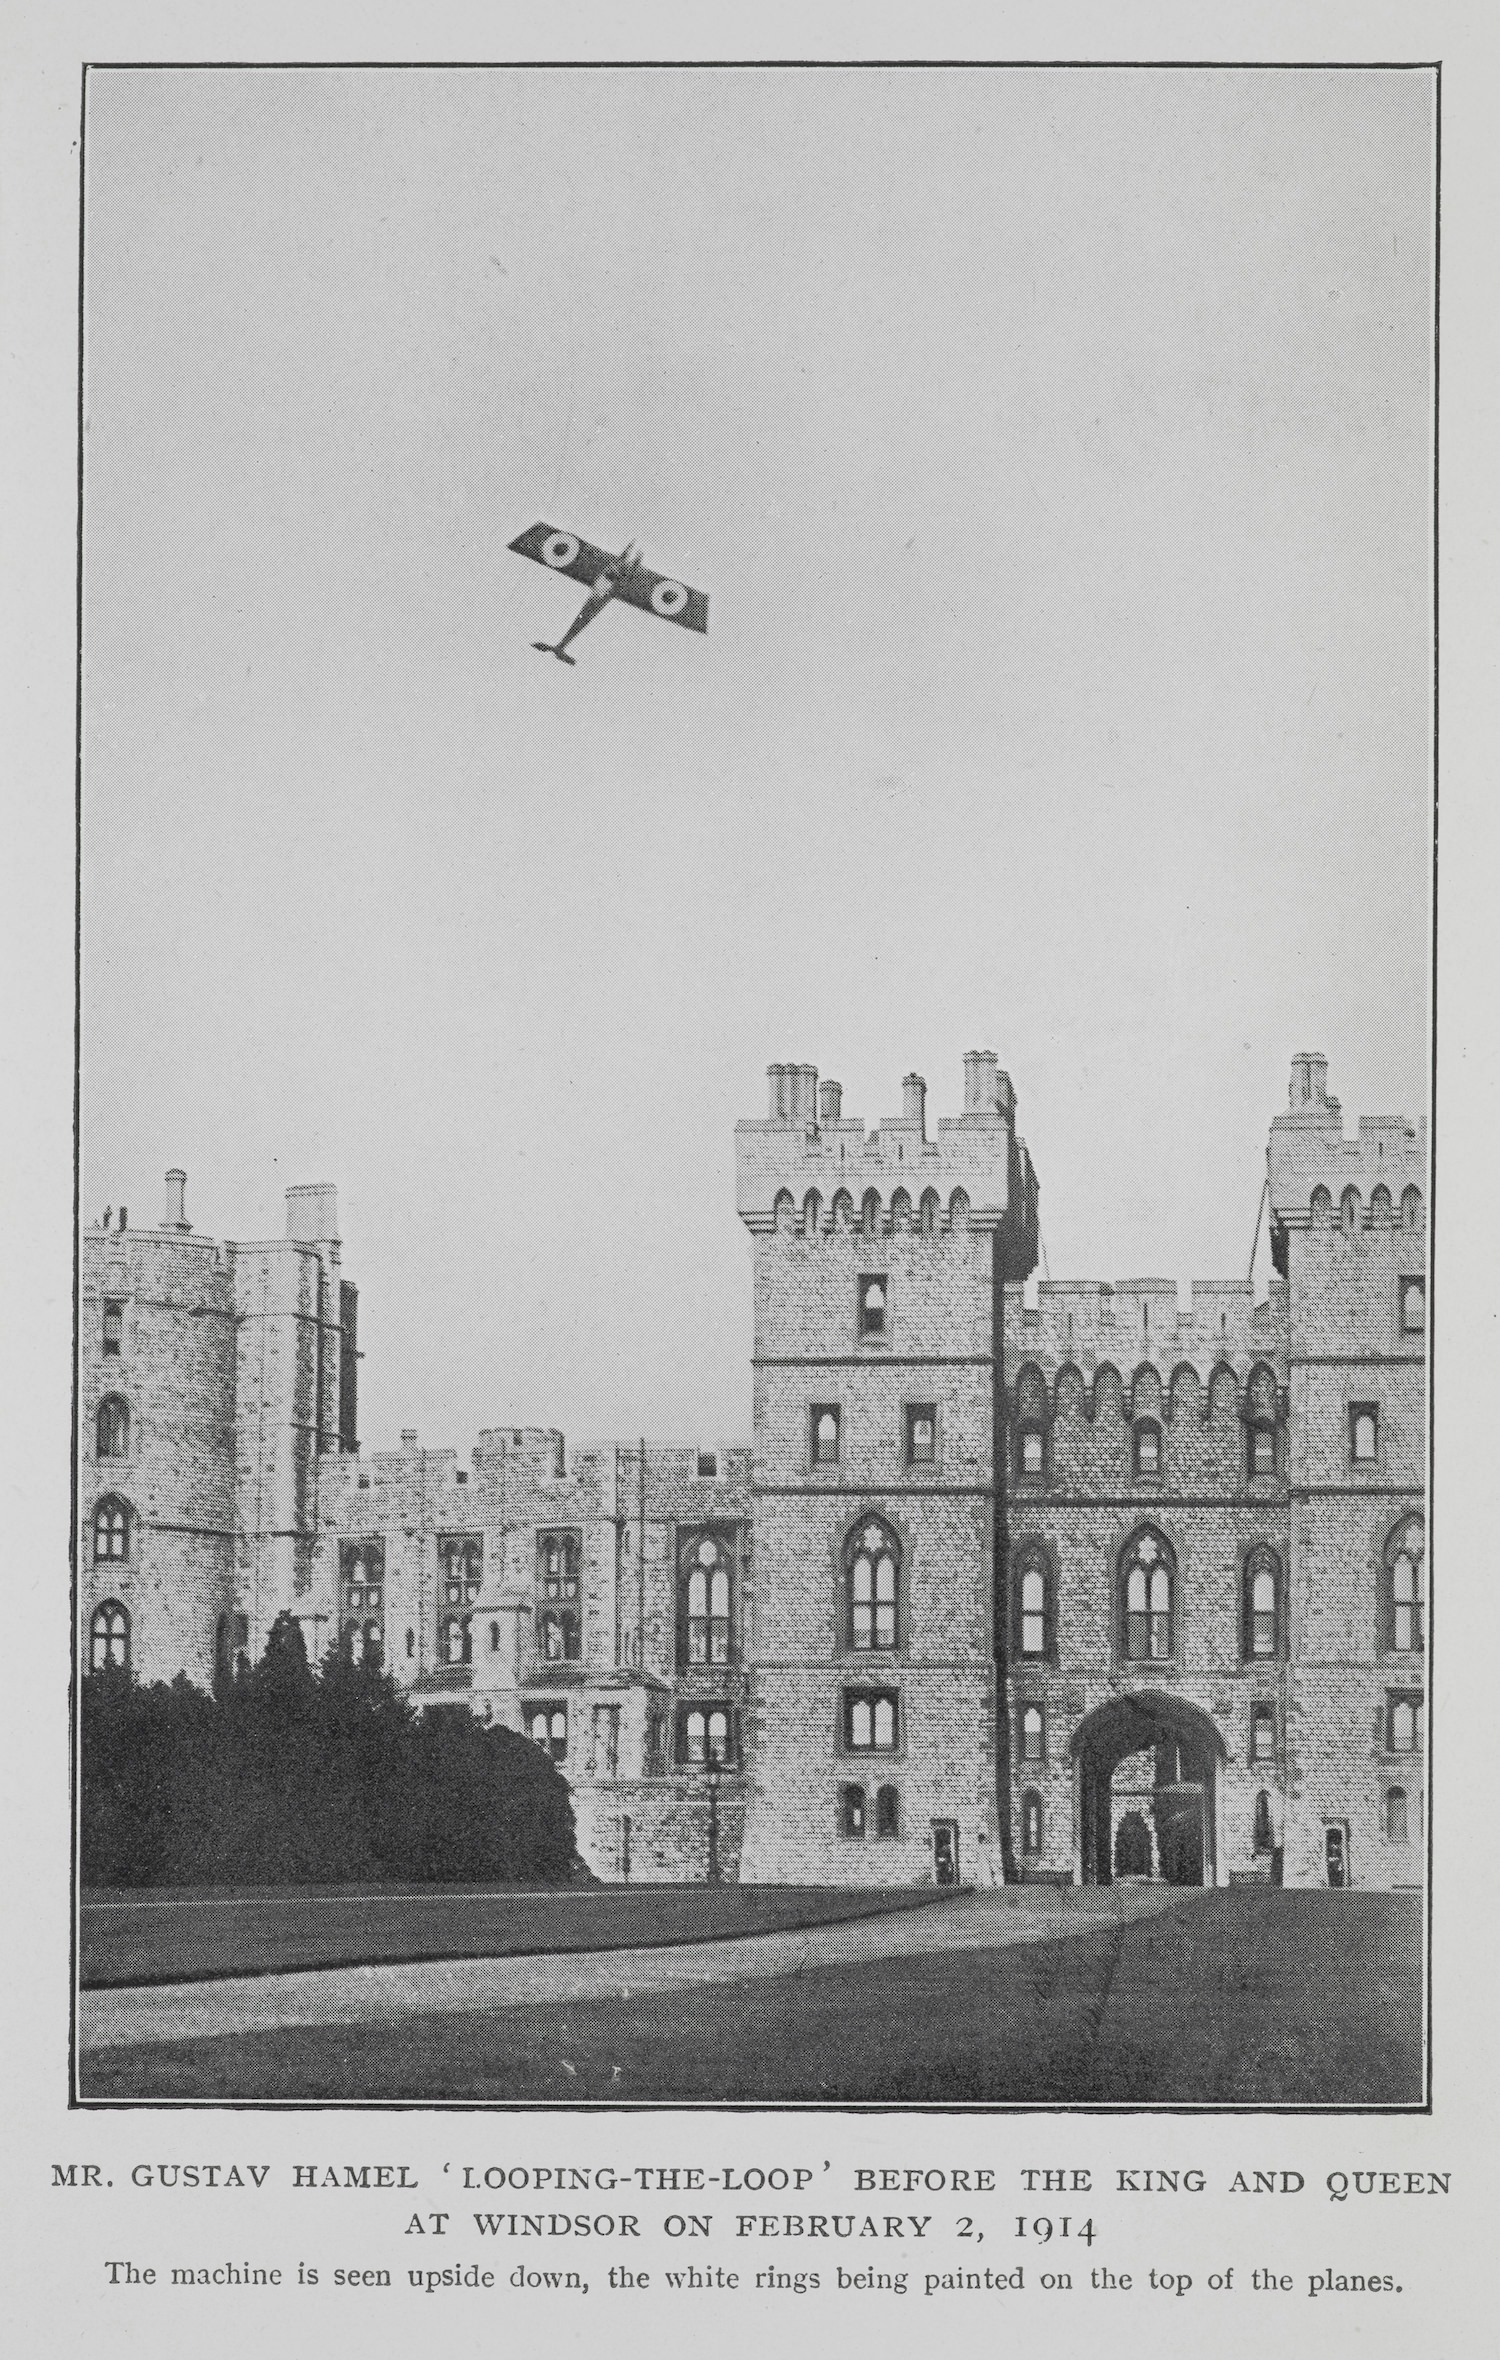 <i>2 February 1914, with white rings painted on the tops of the wings</i>, photograph in <i>Flying</i> by Gustav Hamel and Charles C. Turner (London: Longmans, 1914)